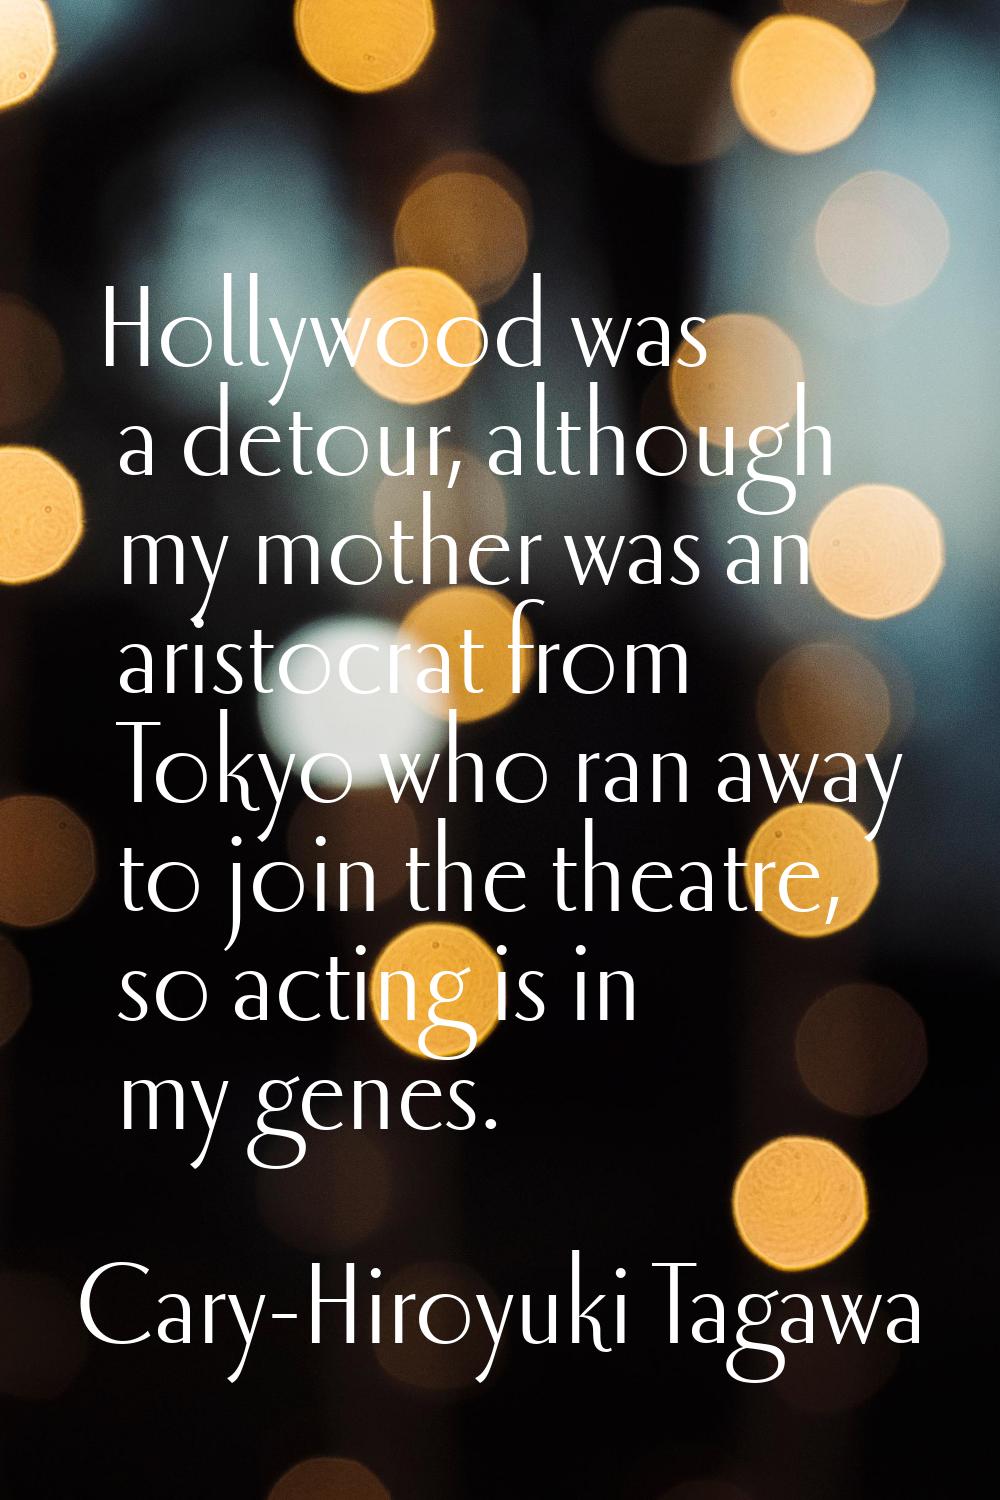 Hollywood was a detour, although my mother was an aristocrat from Tokyo who ran away to join the th